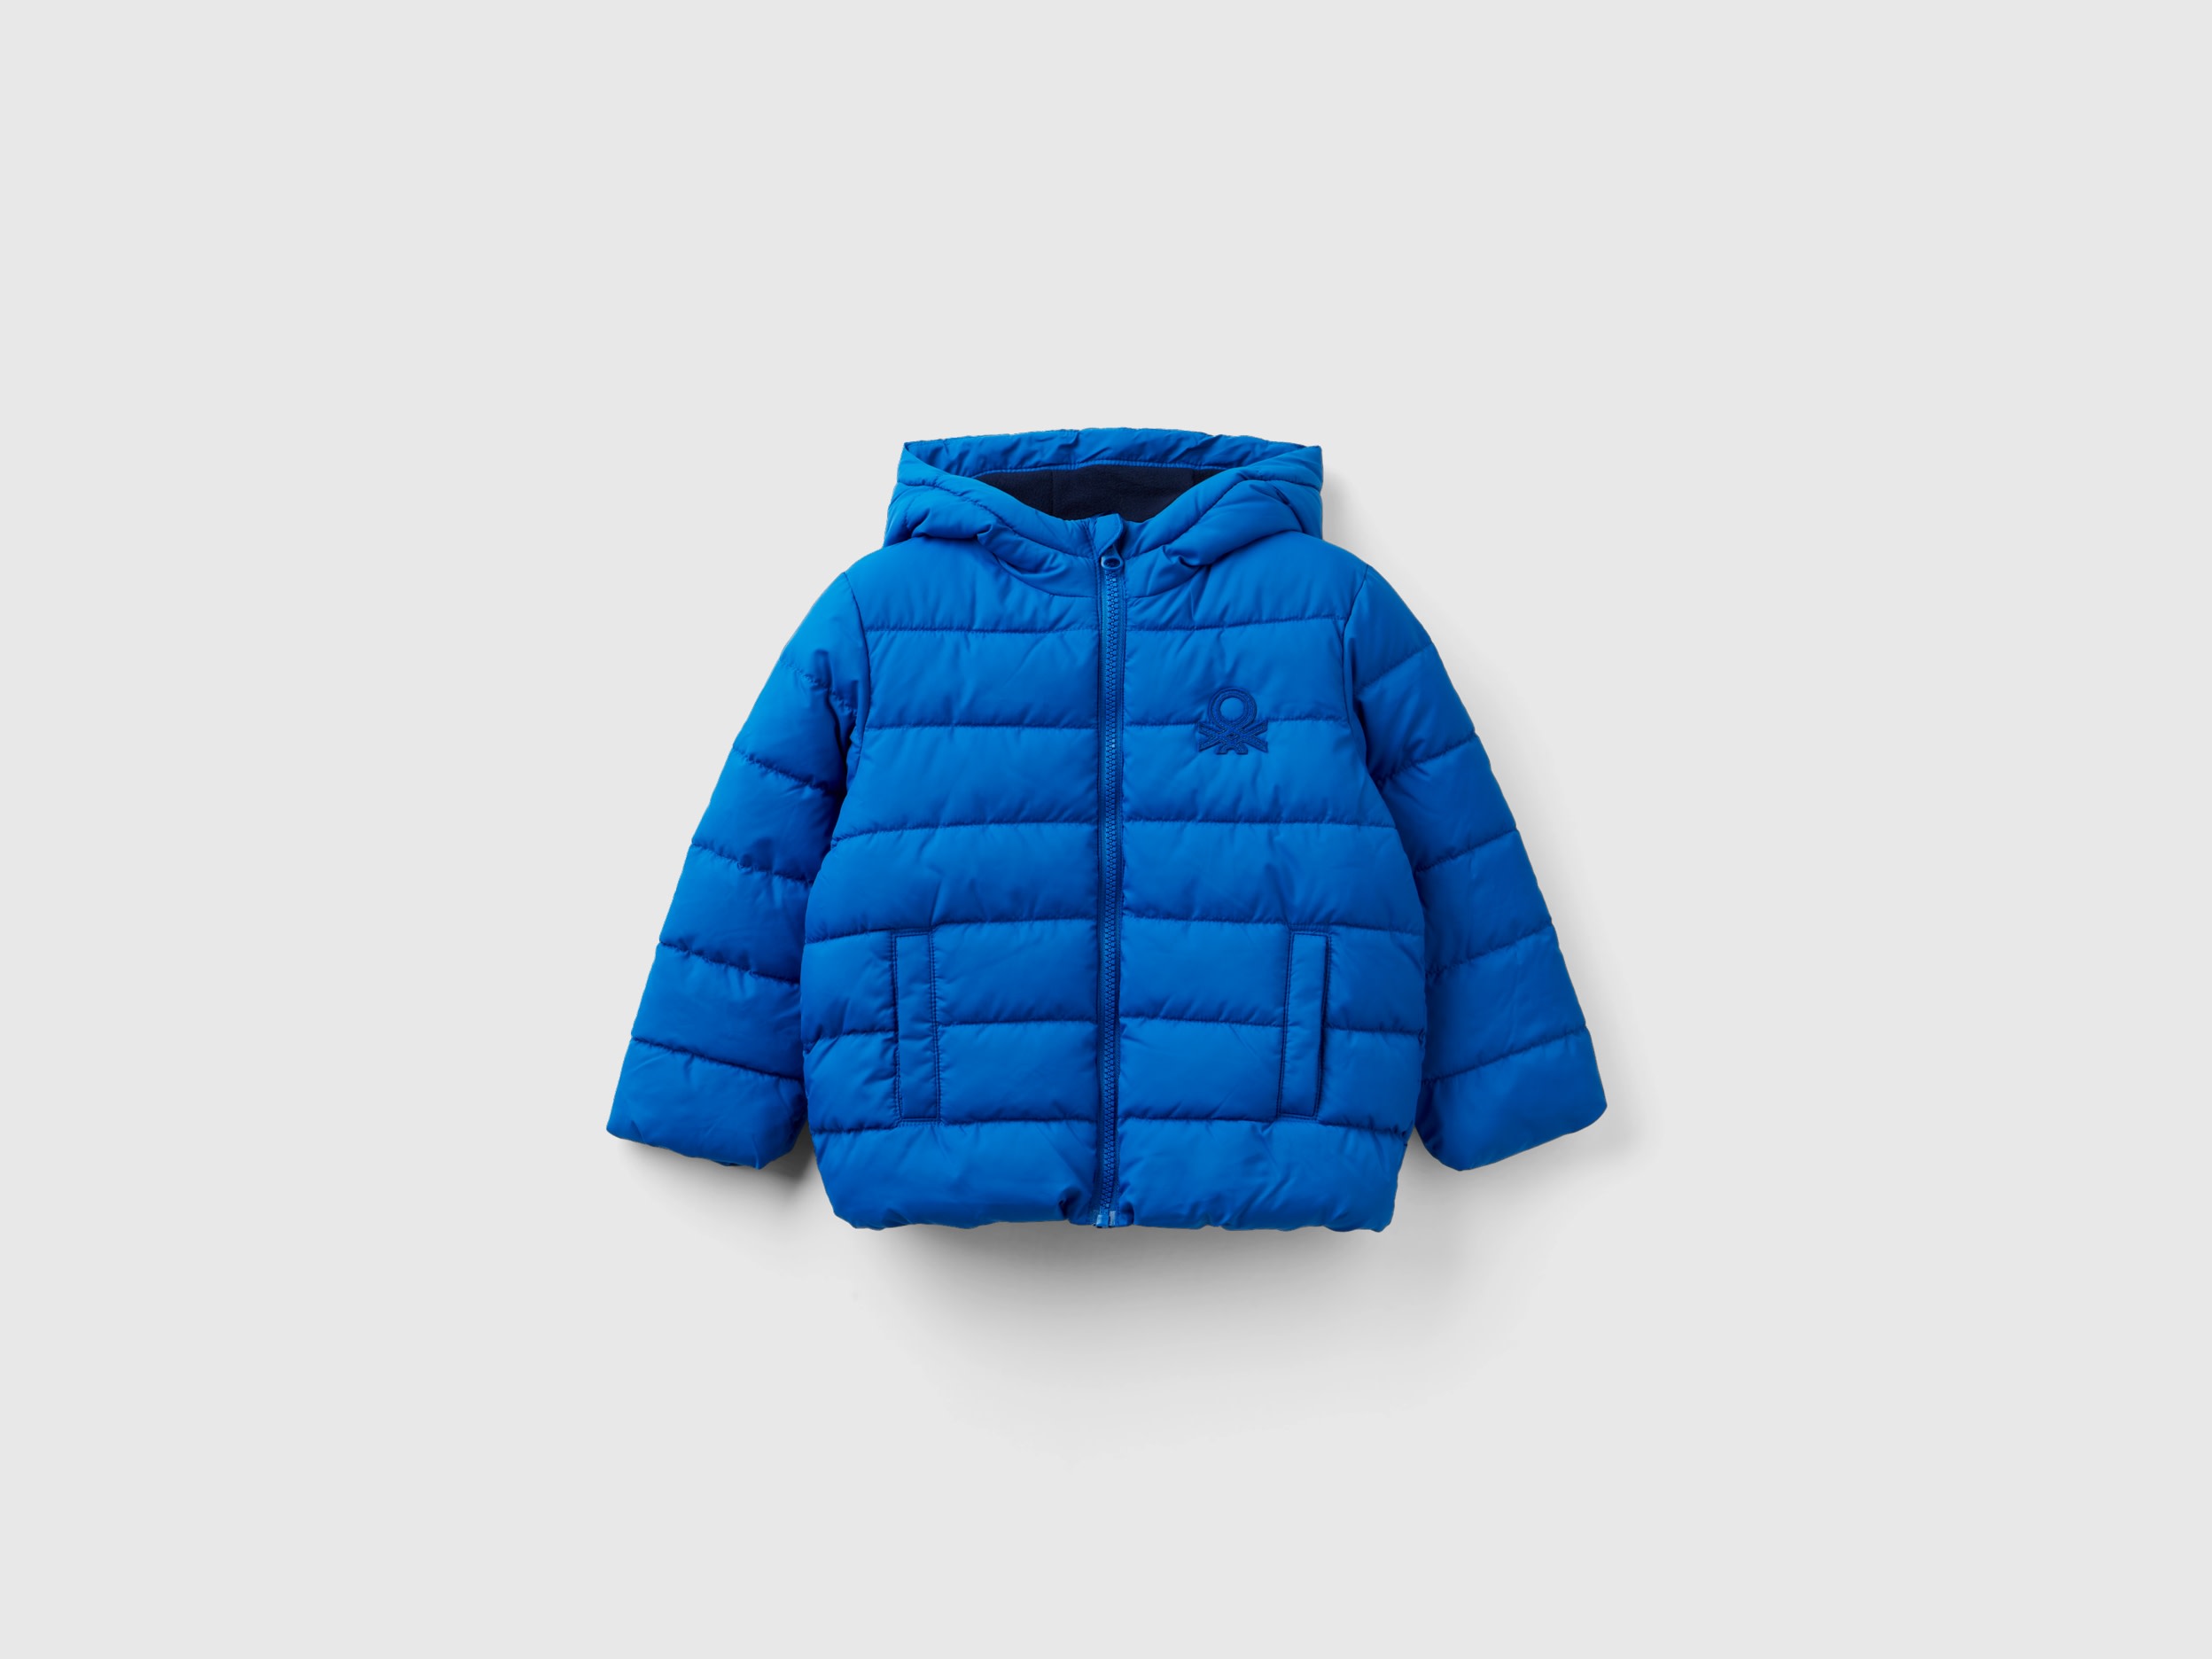 Benetton, Puffer Jacket With Hood And Logo, size 3-4, Bright Blue, Kids